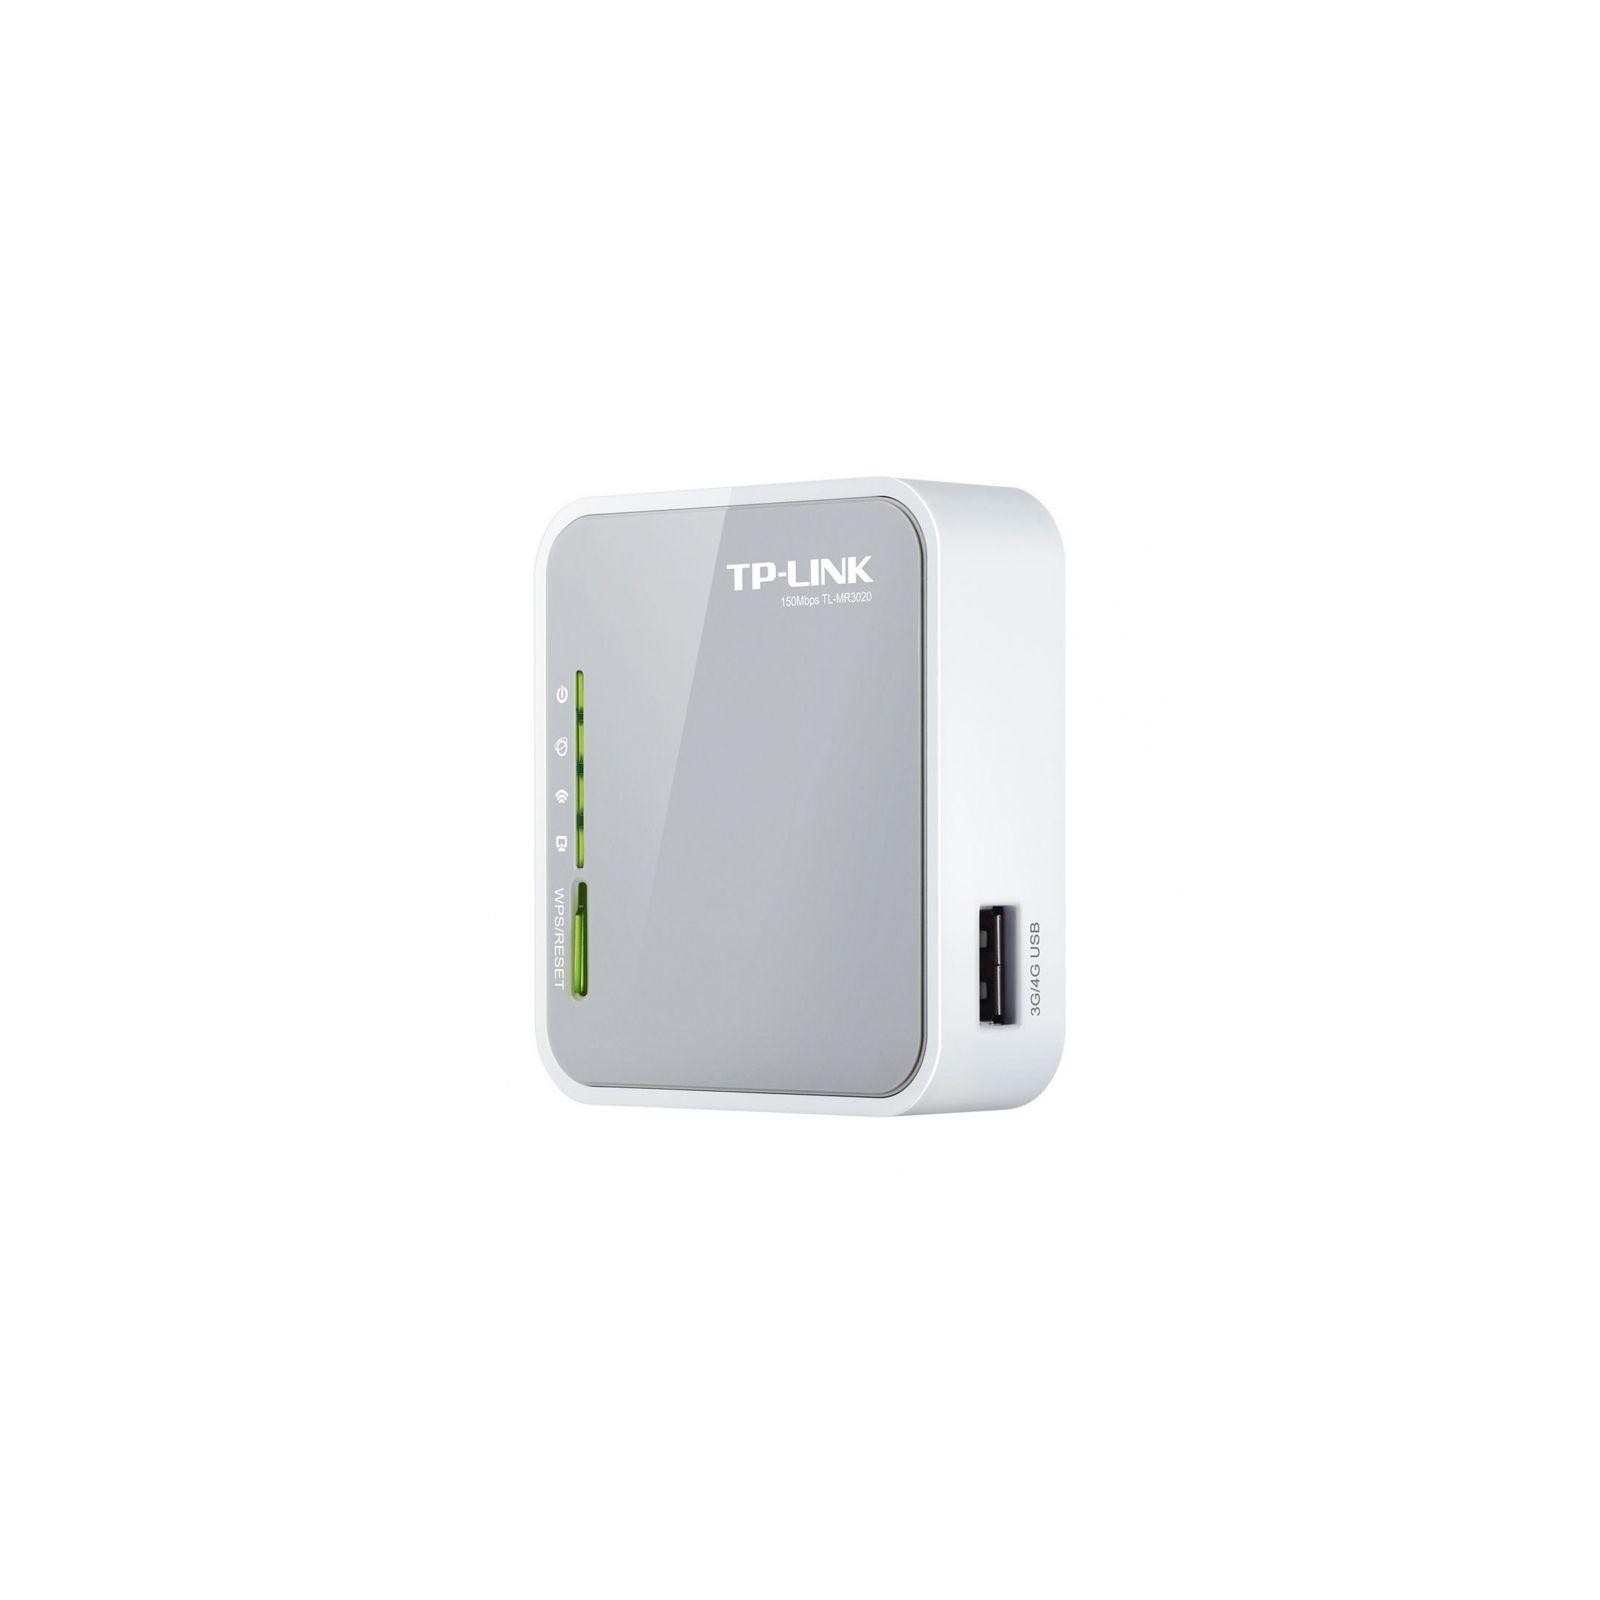 Wireless Router Tp-Link N150 Tl-Mr3020 3G/3.75G